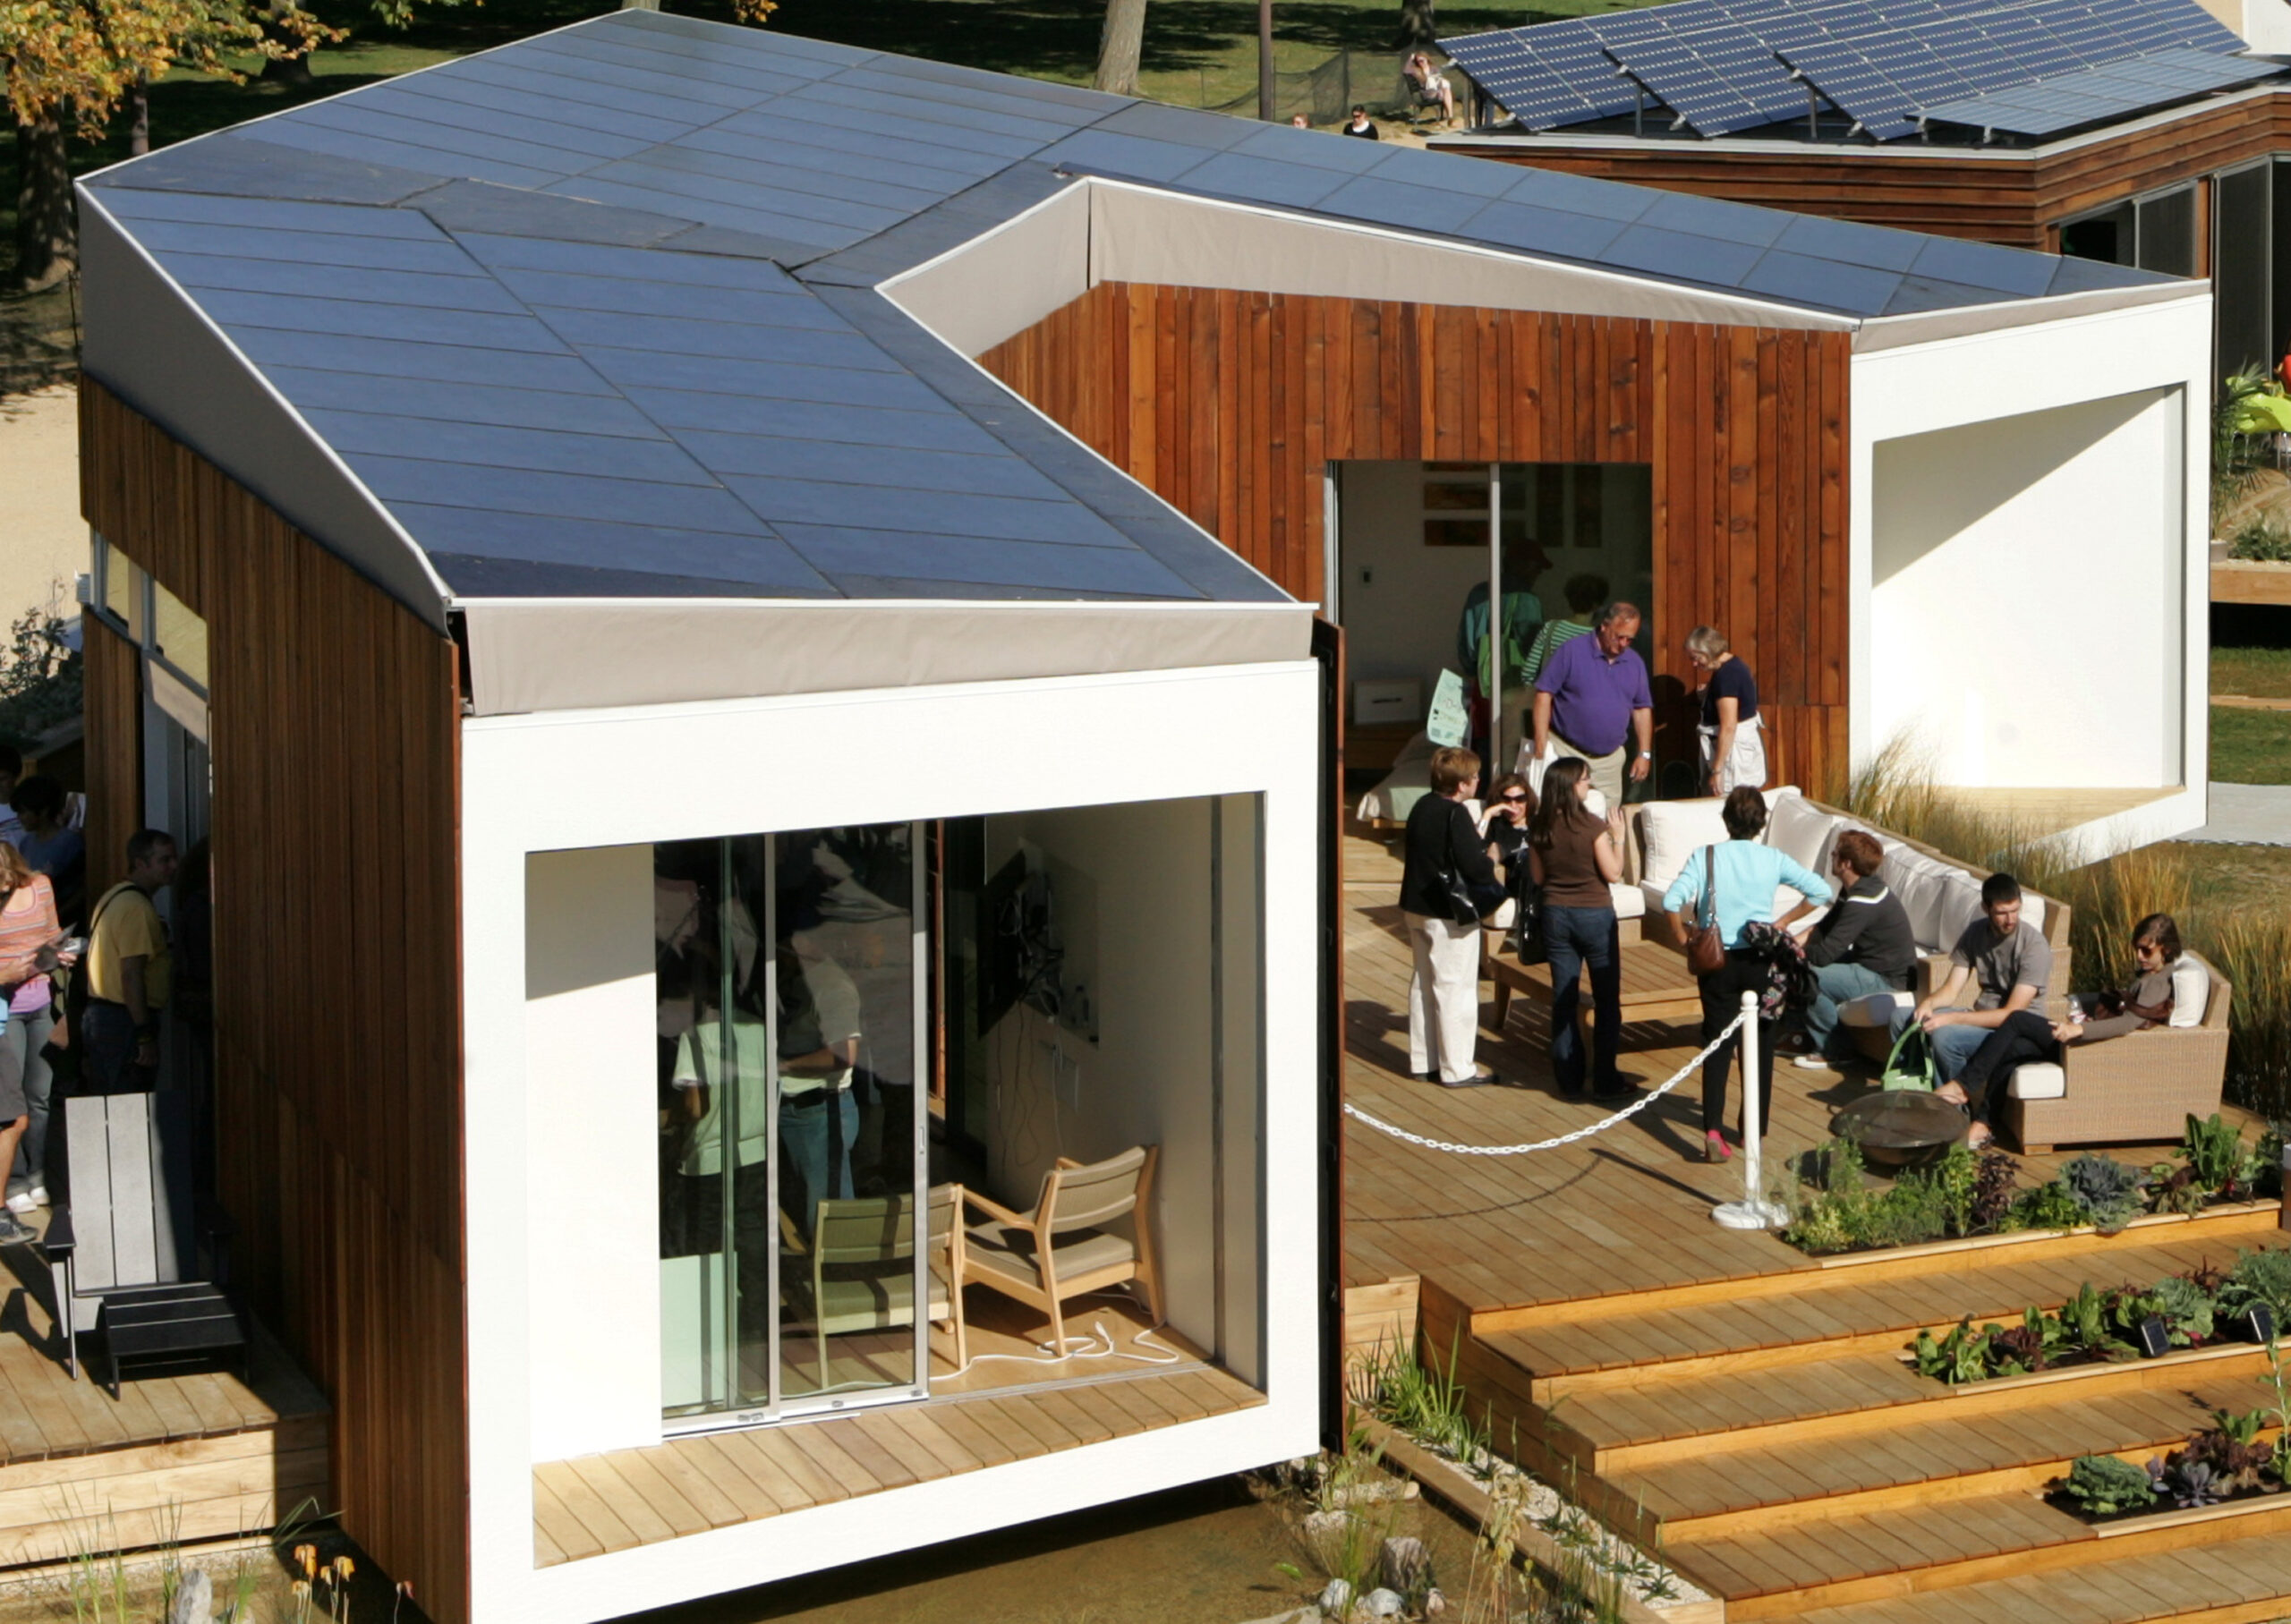 20 Teams Build High-Tech Houses in “Solar Village” Competition